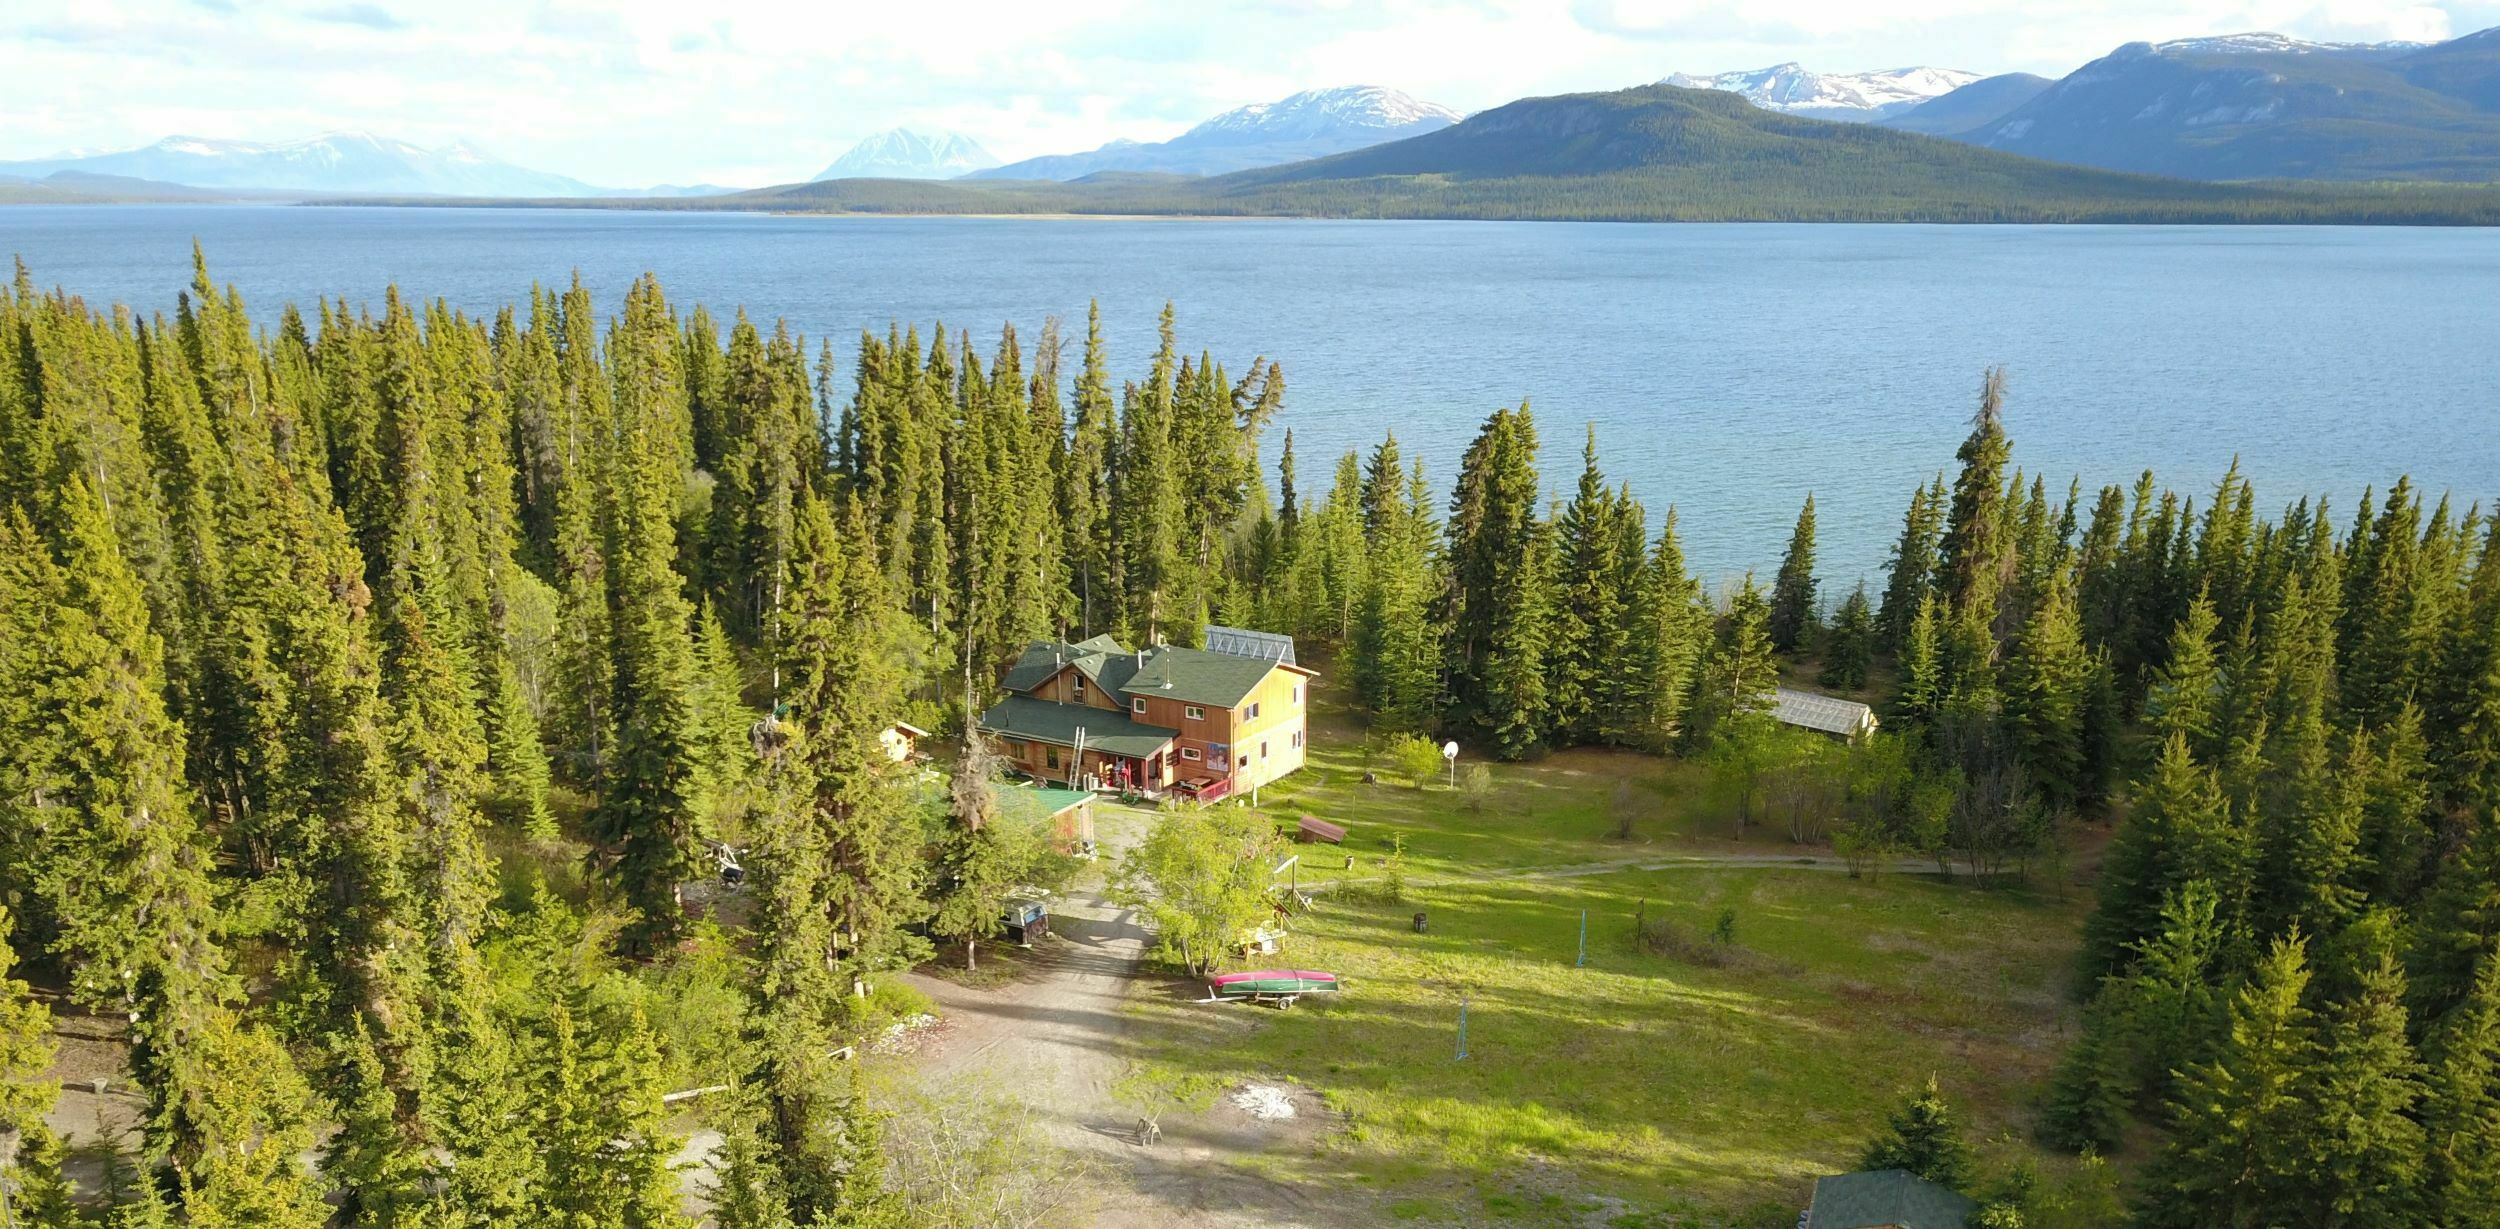 Aerial photo of Little Atlin Lodge showing a secluded lakeside house surrounded by forest and mountains.